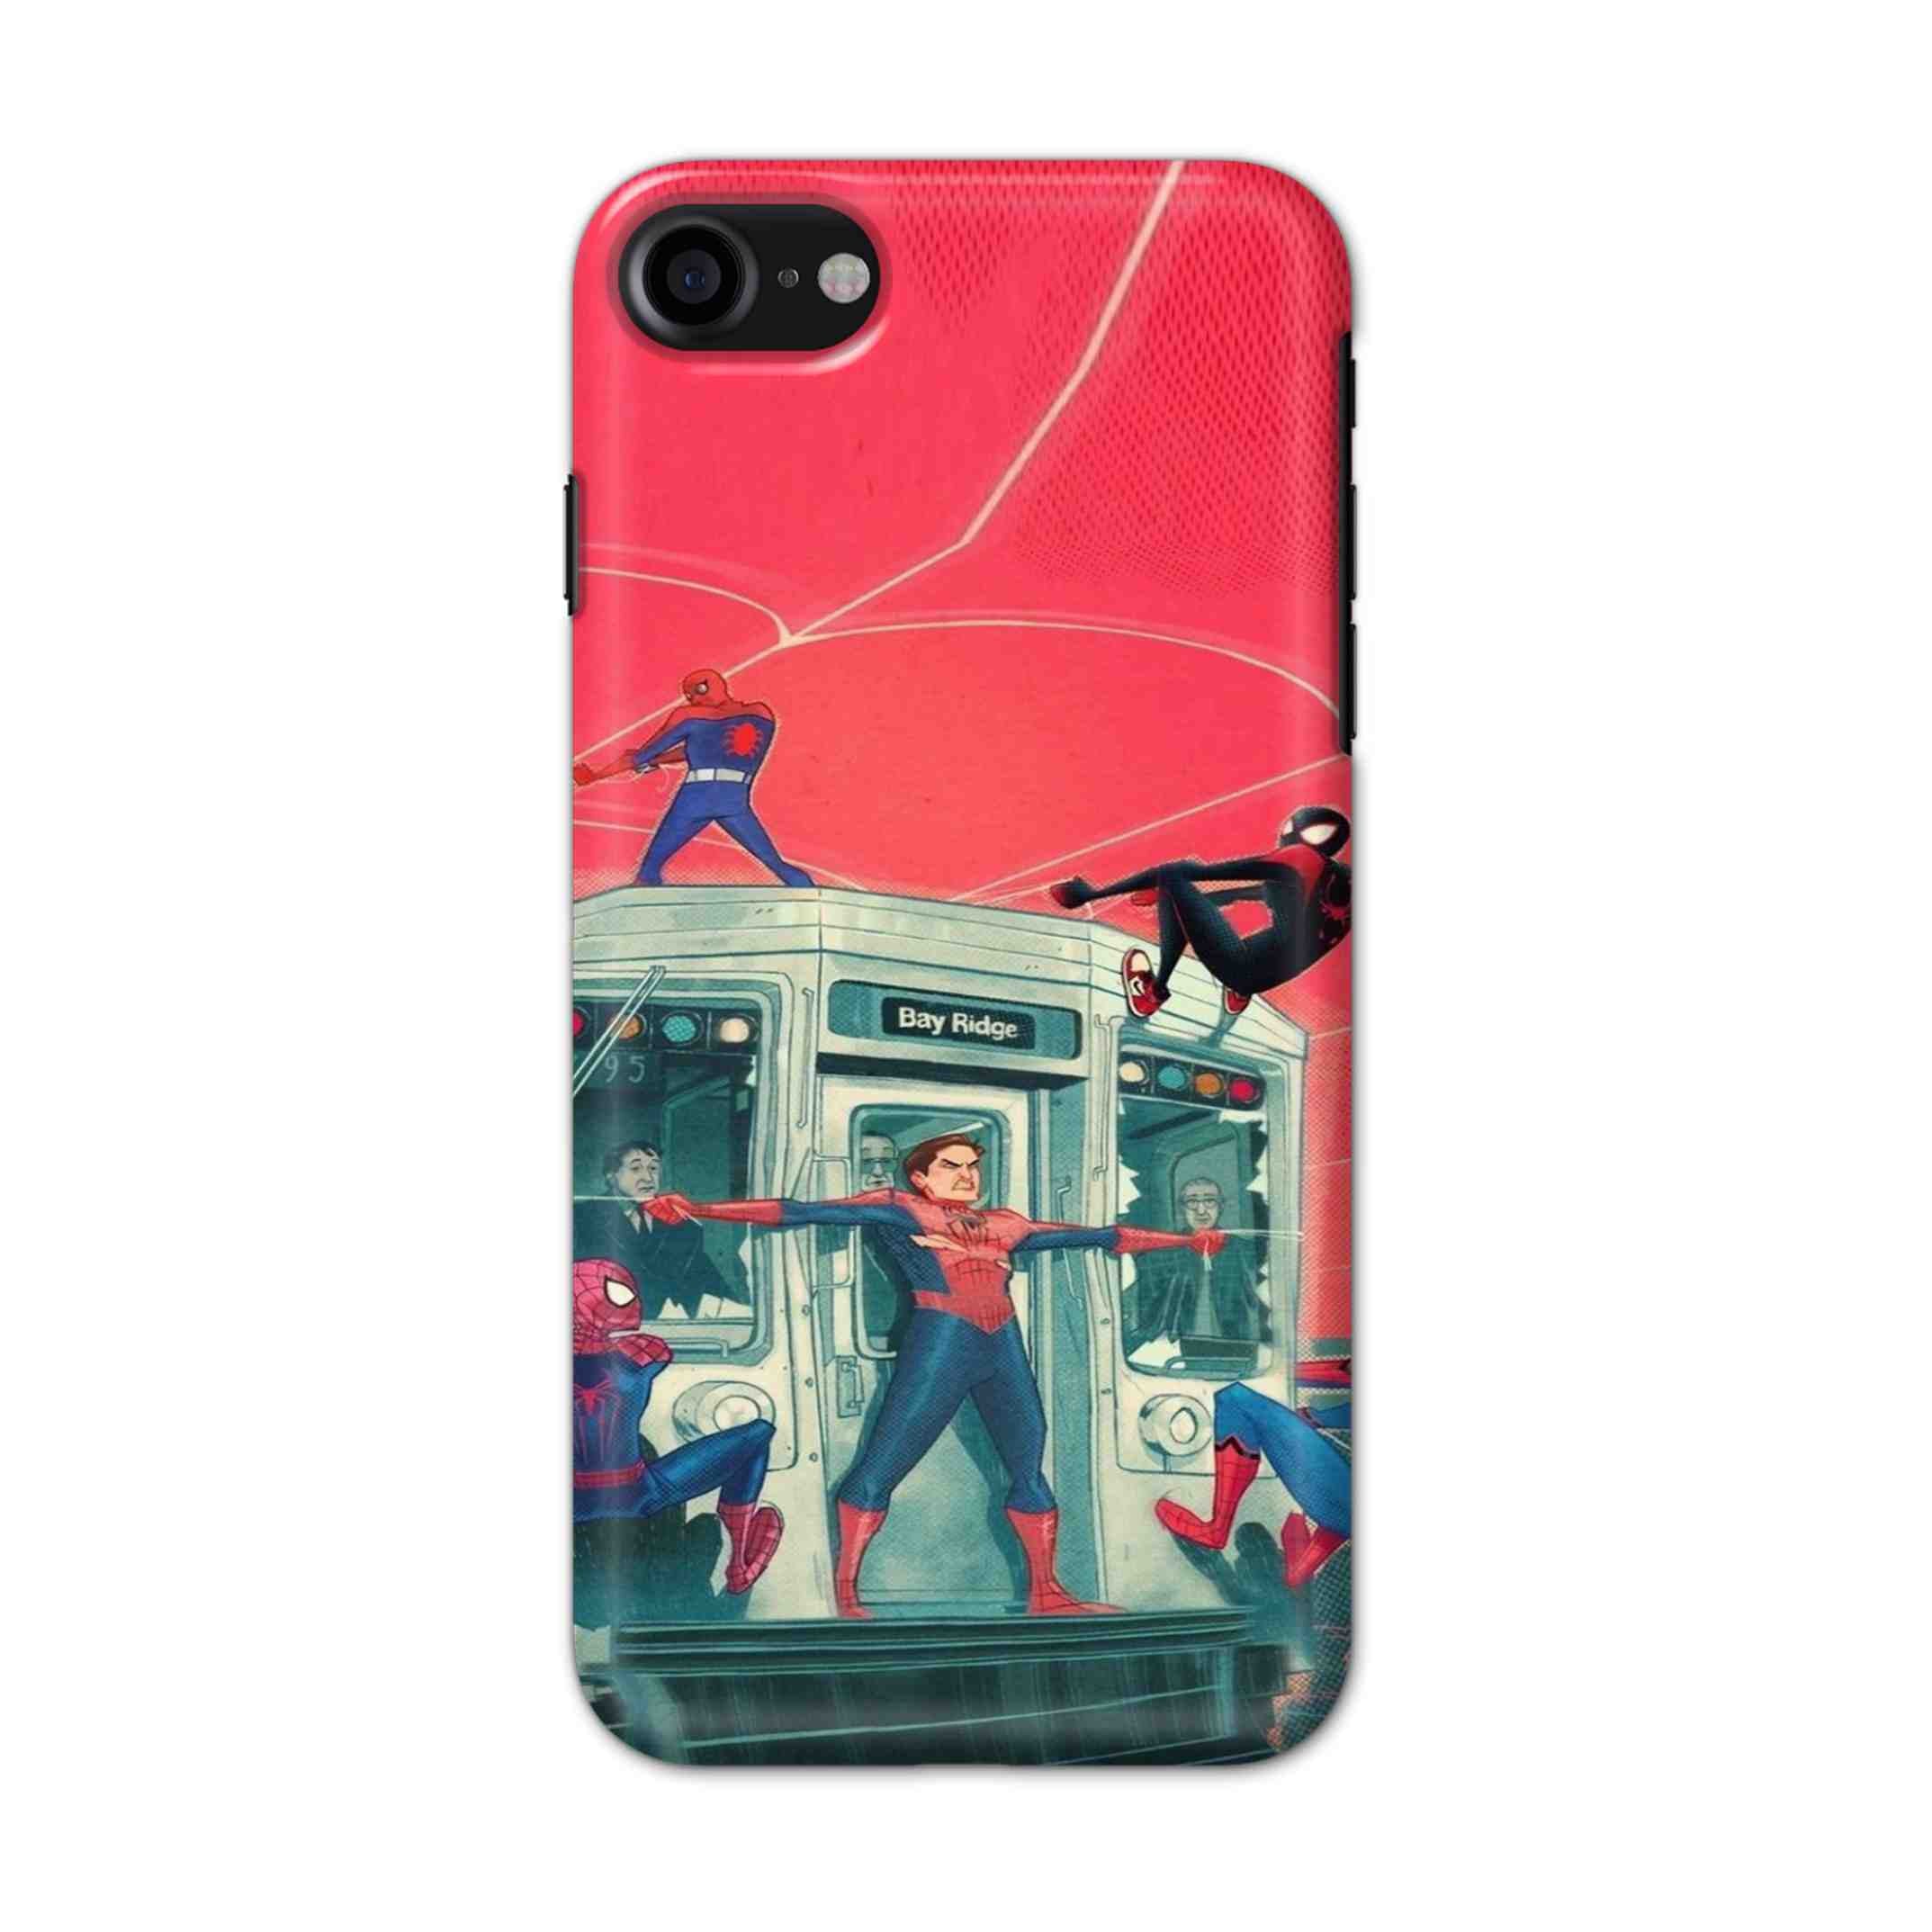 Buy All Spiderman Hard Back Mobile Phone Case/Cover For iPhone 7 / 8 Online